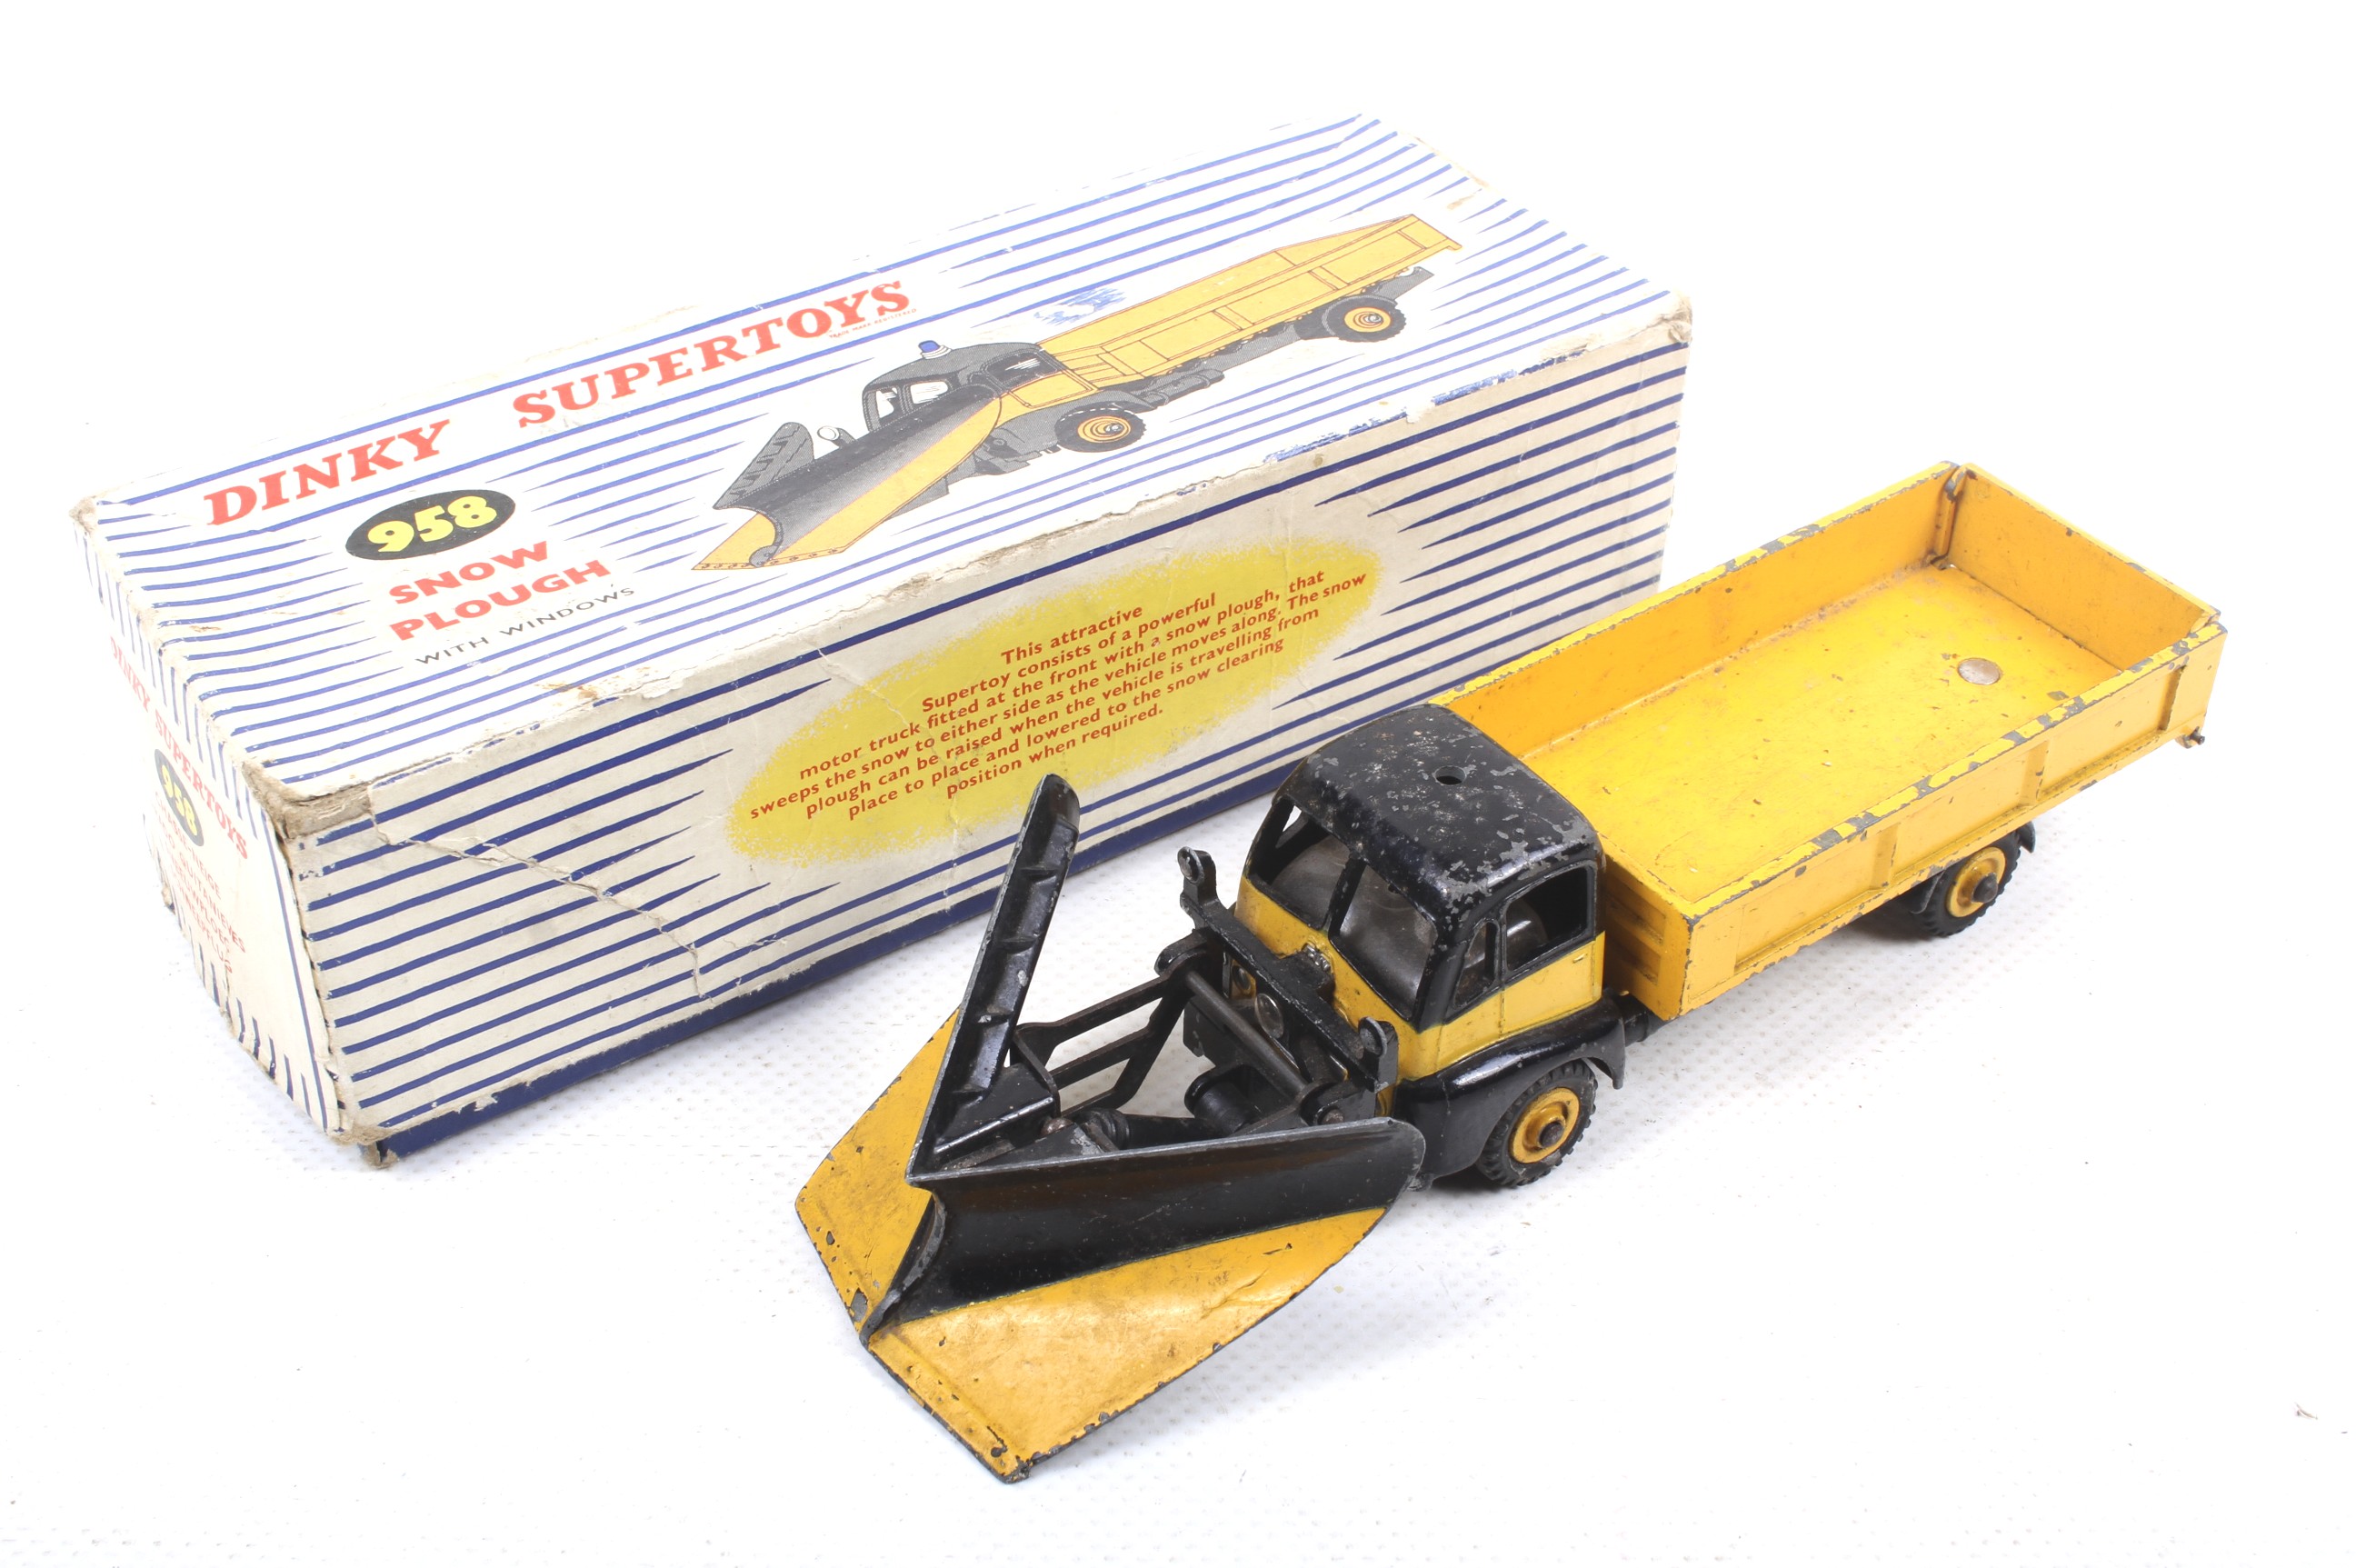 A Dinky diecast Snow Plough. No. 958, black and yellow body, in original box.